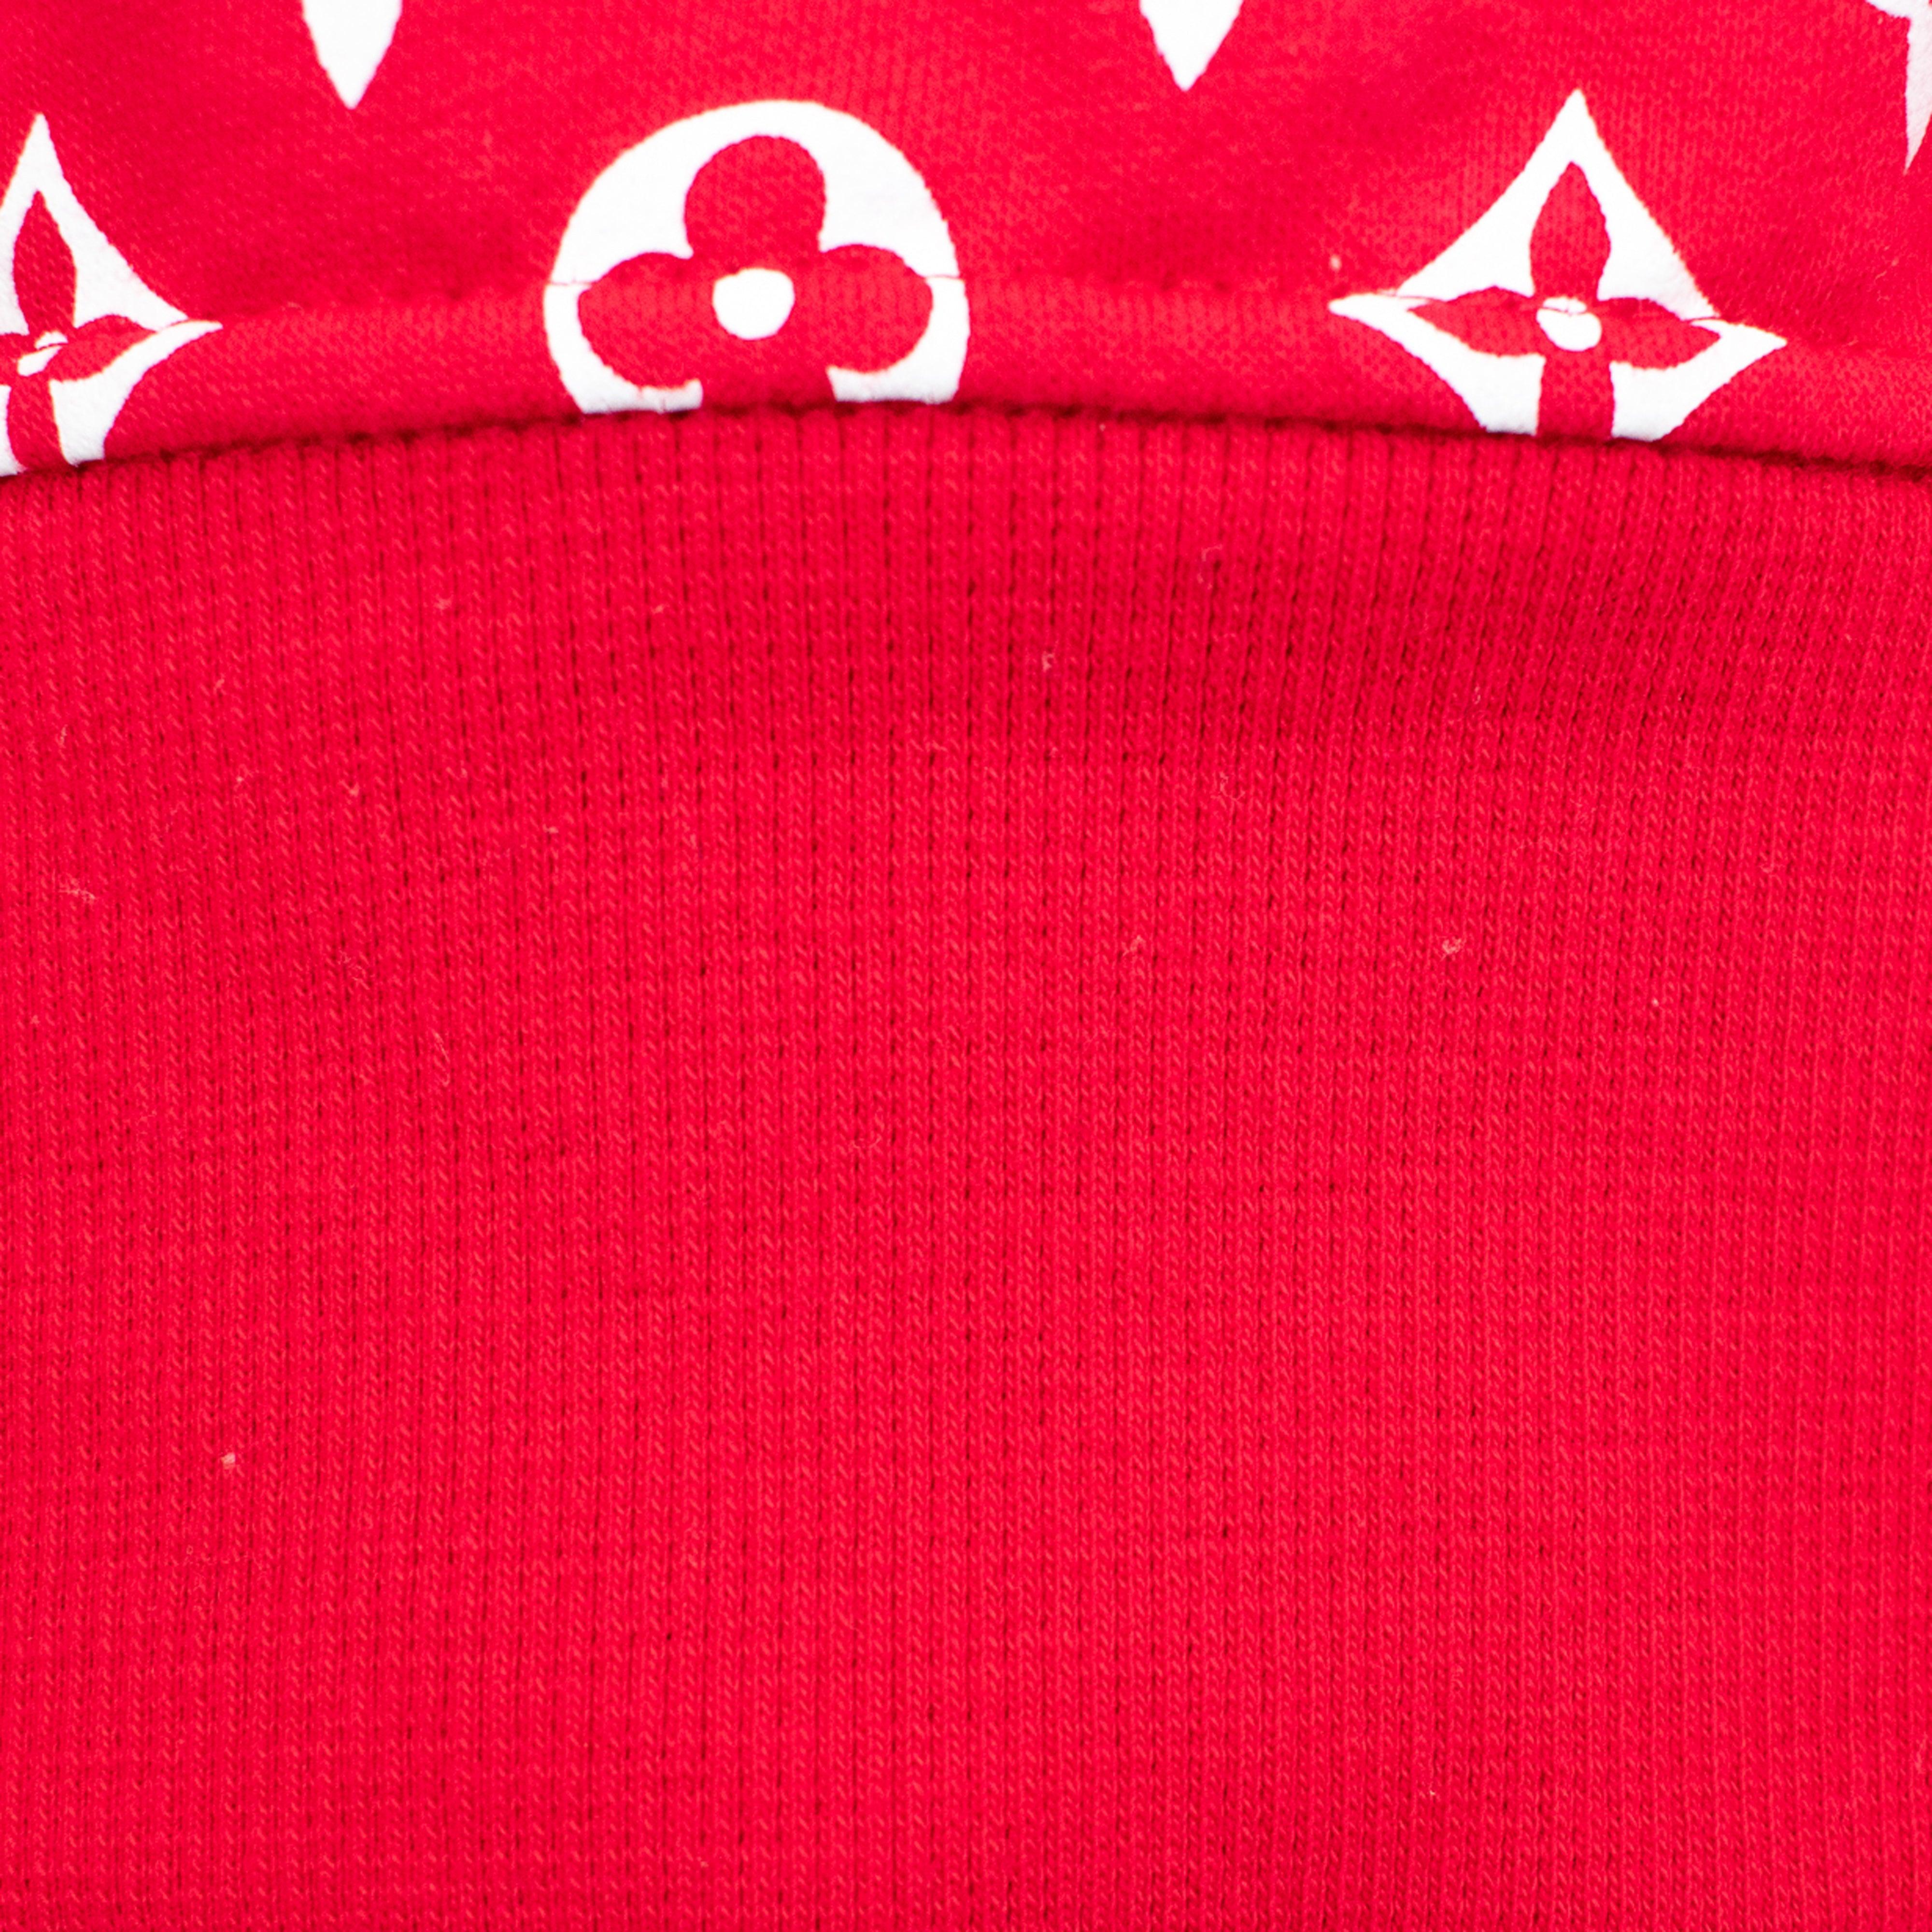 LOUIS VUITTON Pullover Hoodie Red Monogram size M Limited Edition Supreme  size:XXS｜Product Code：2104101506152｜BRAND OFF Online Store